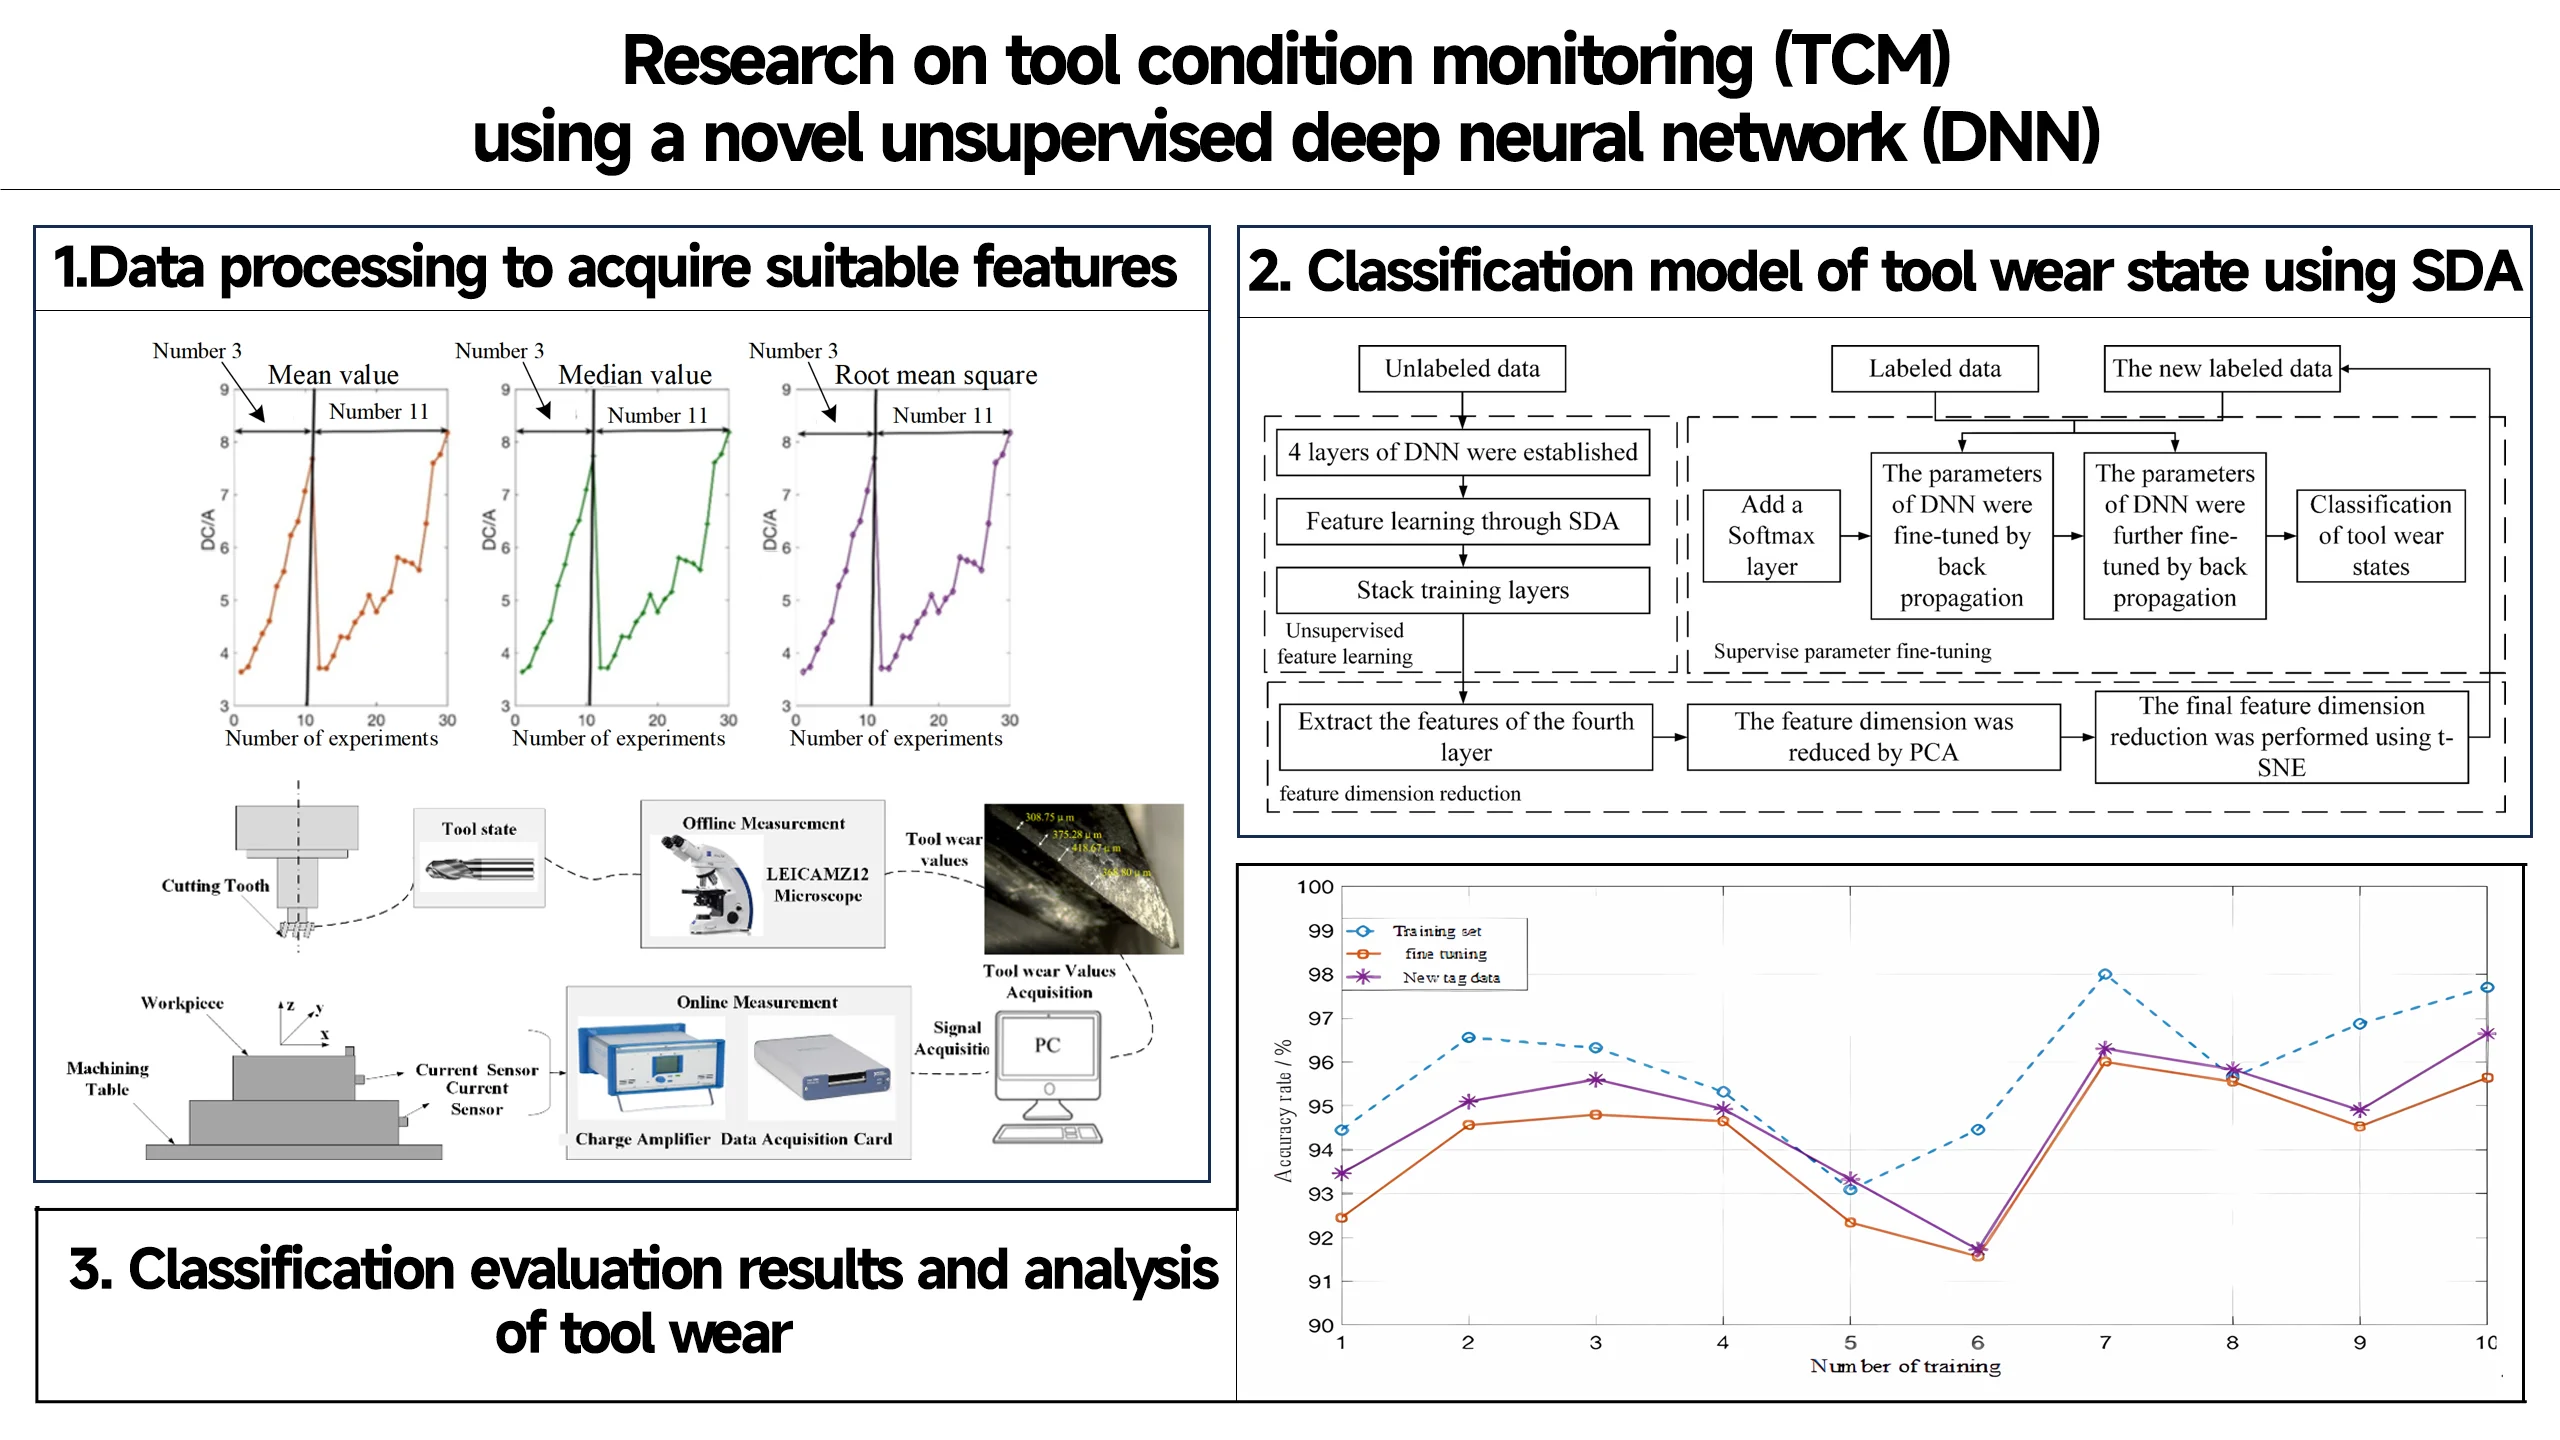 Research on tool condition monitoring (TCM) using a novel unsupervised deep neural network (DNN)